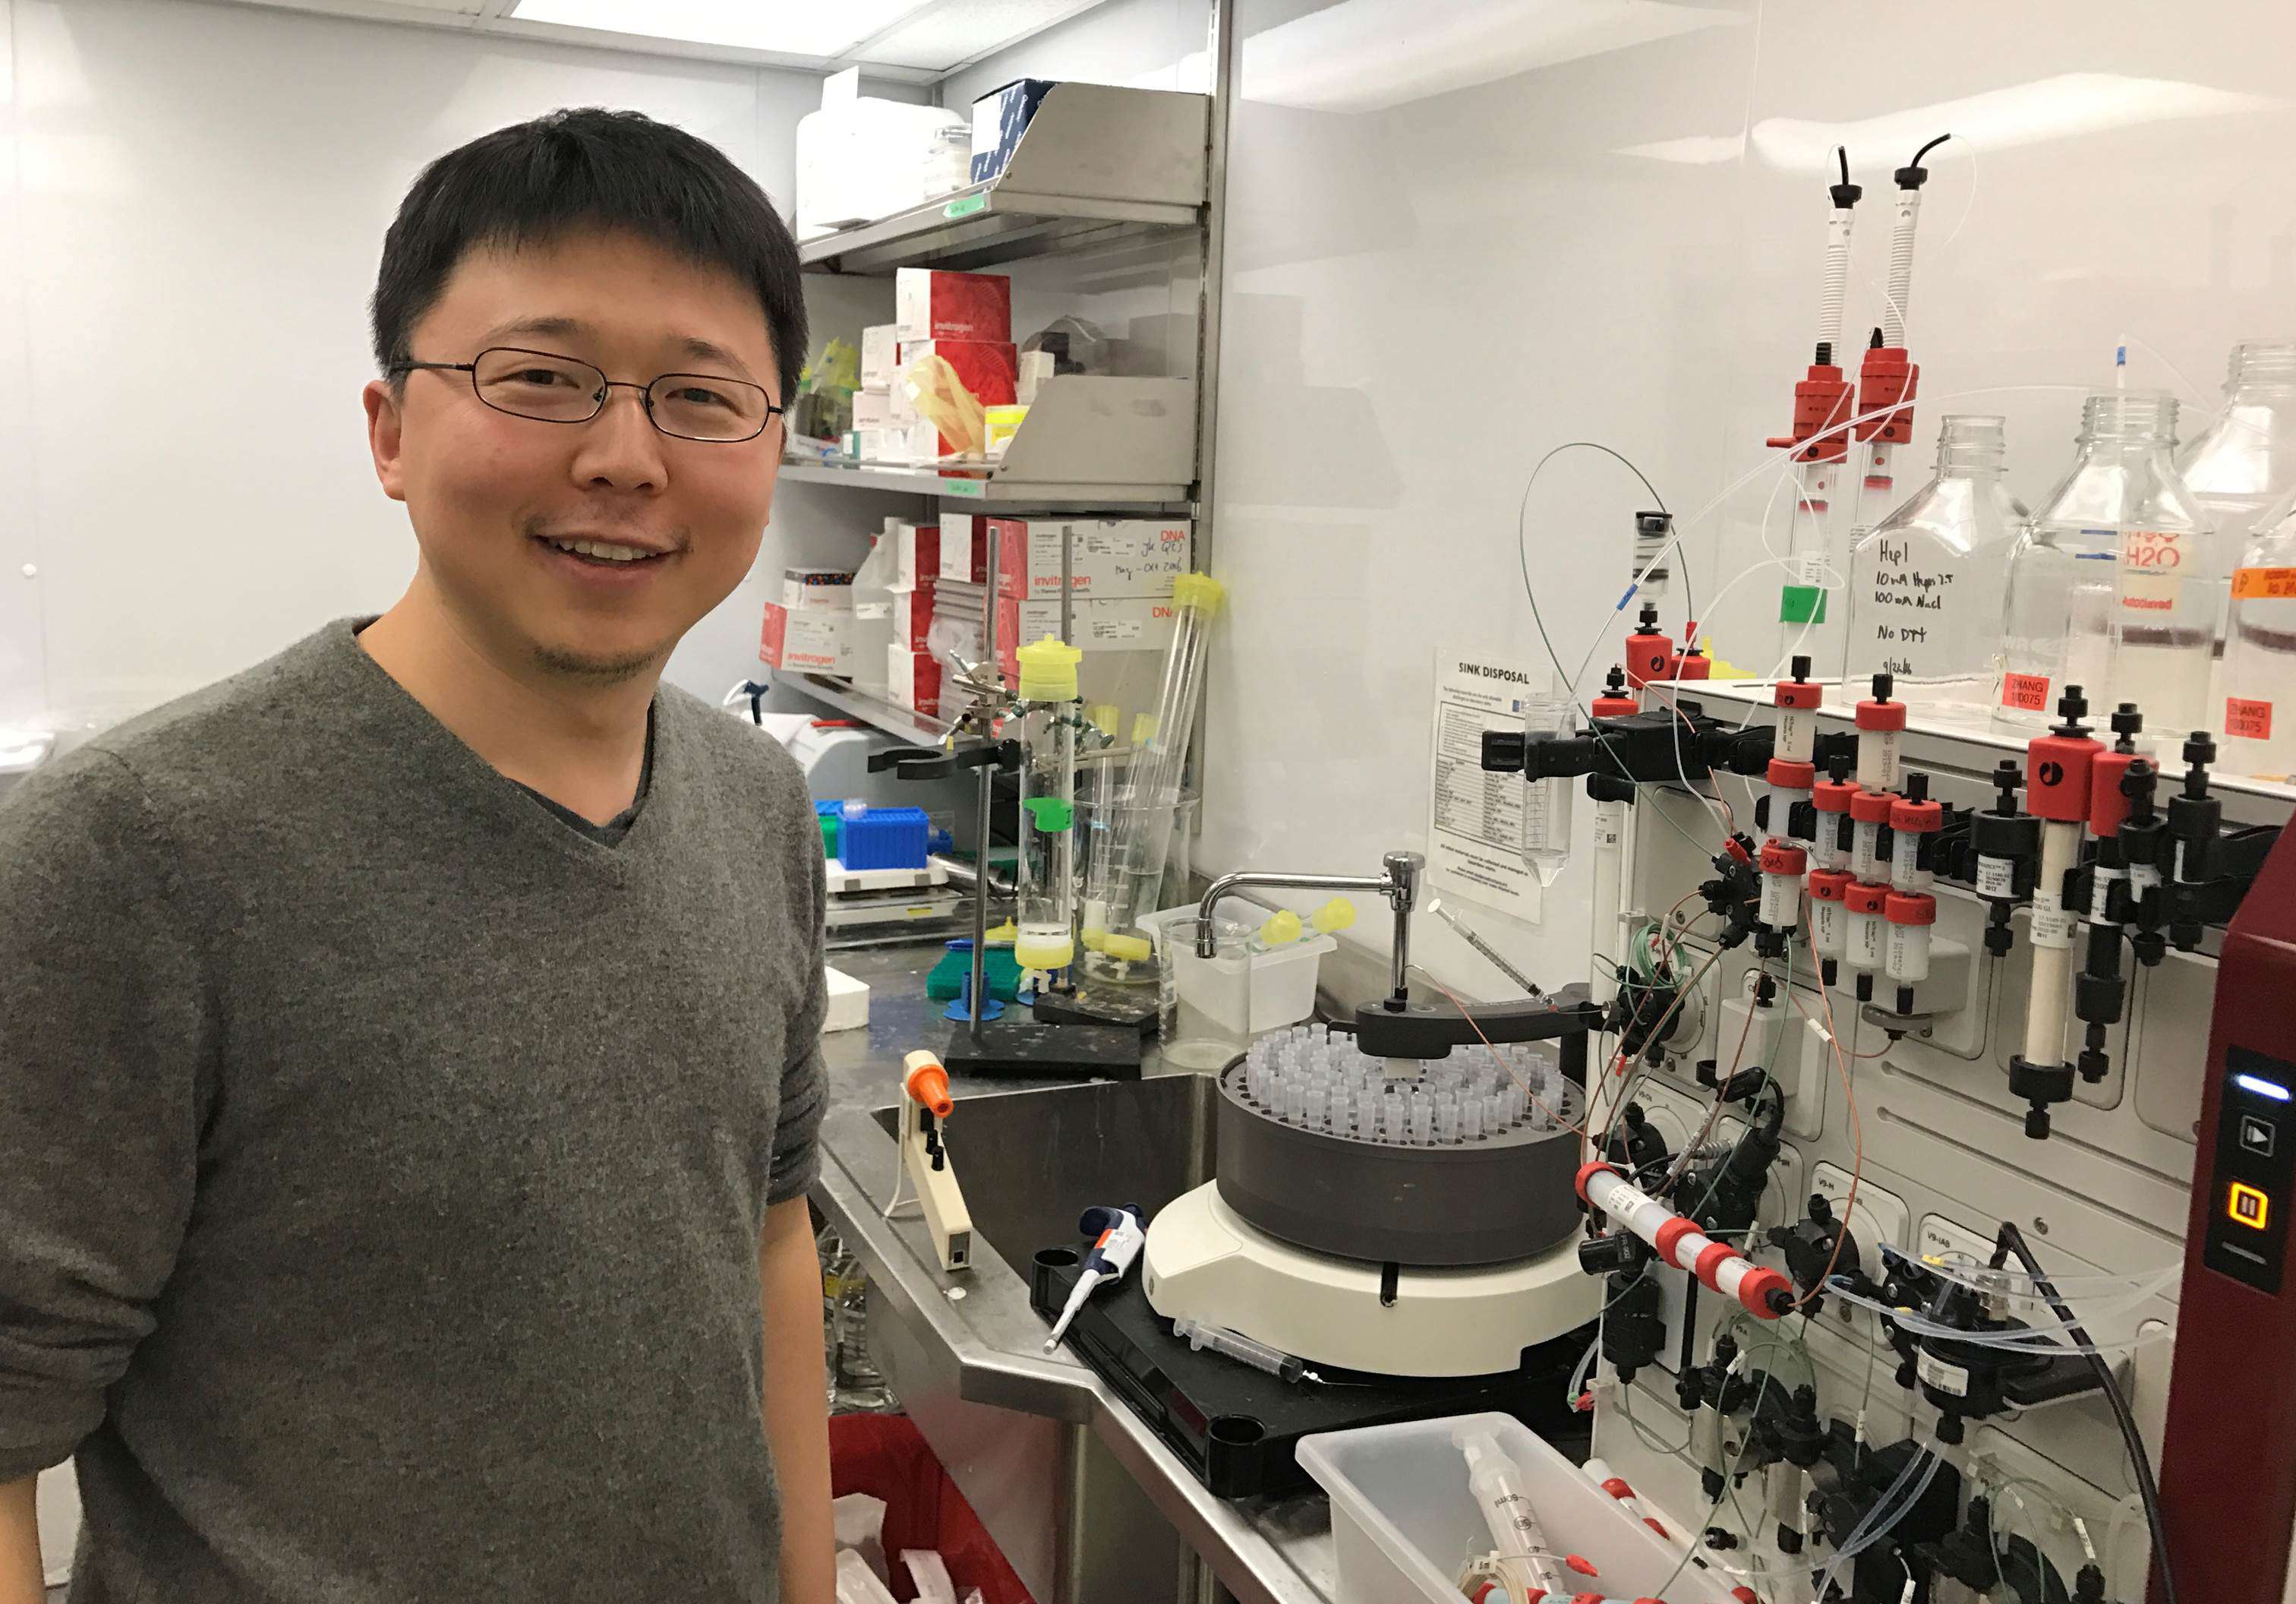 Meet the young China-born American scientist who is making waves with a technique that could roll back disease and usher in “designer babies”